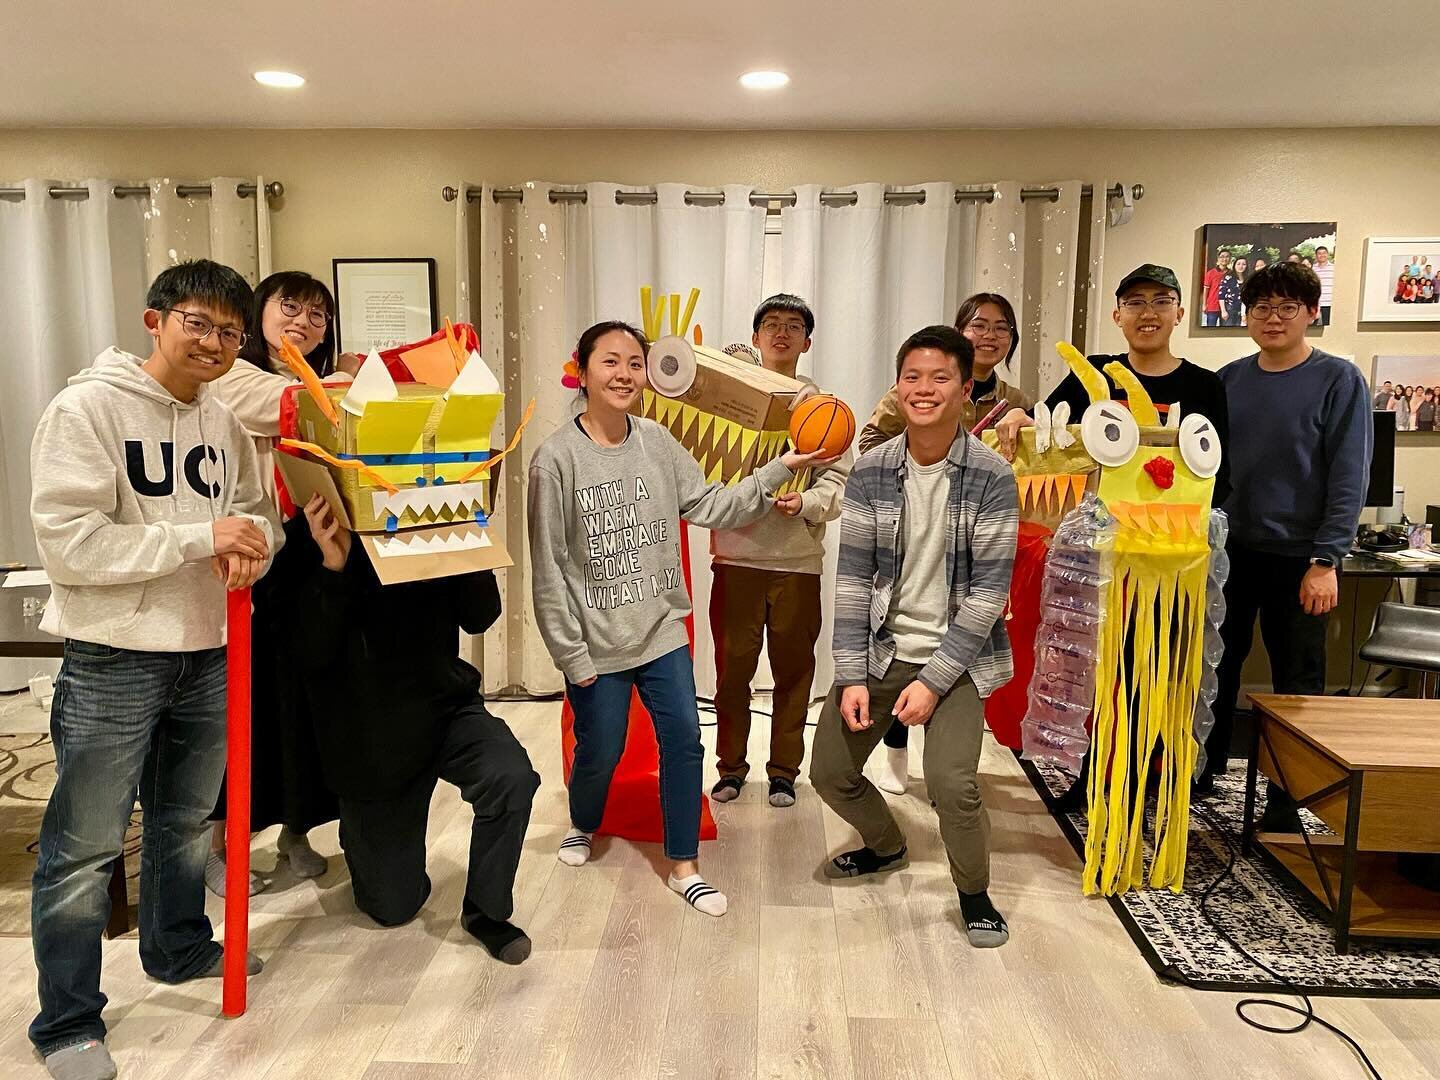 02.09.2024 - Throwback to our Lunar New Year celebrations where the grad group had a nice hotpot dinner and created their own dragons 🐉 for dragon dancing. The undergrad group celebrated by making yummy dumplings together 🥟